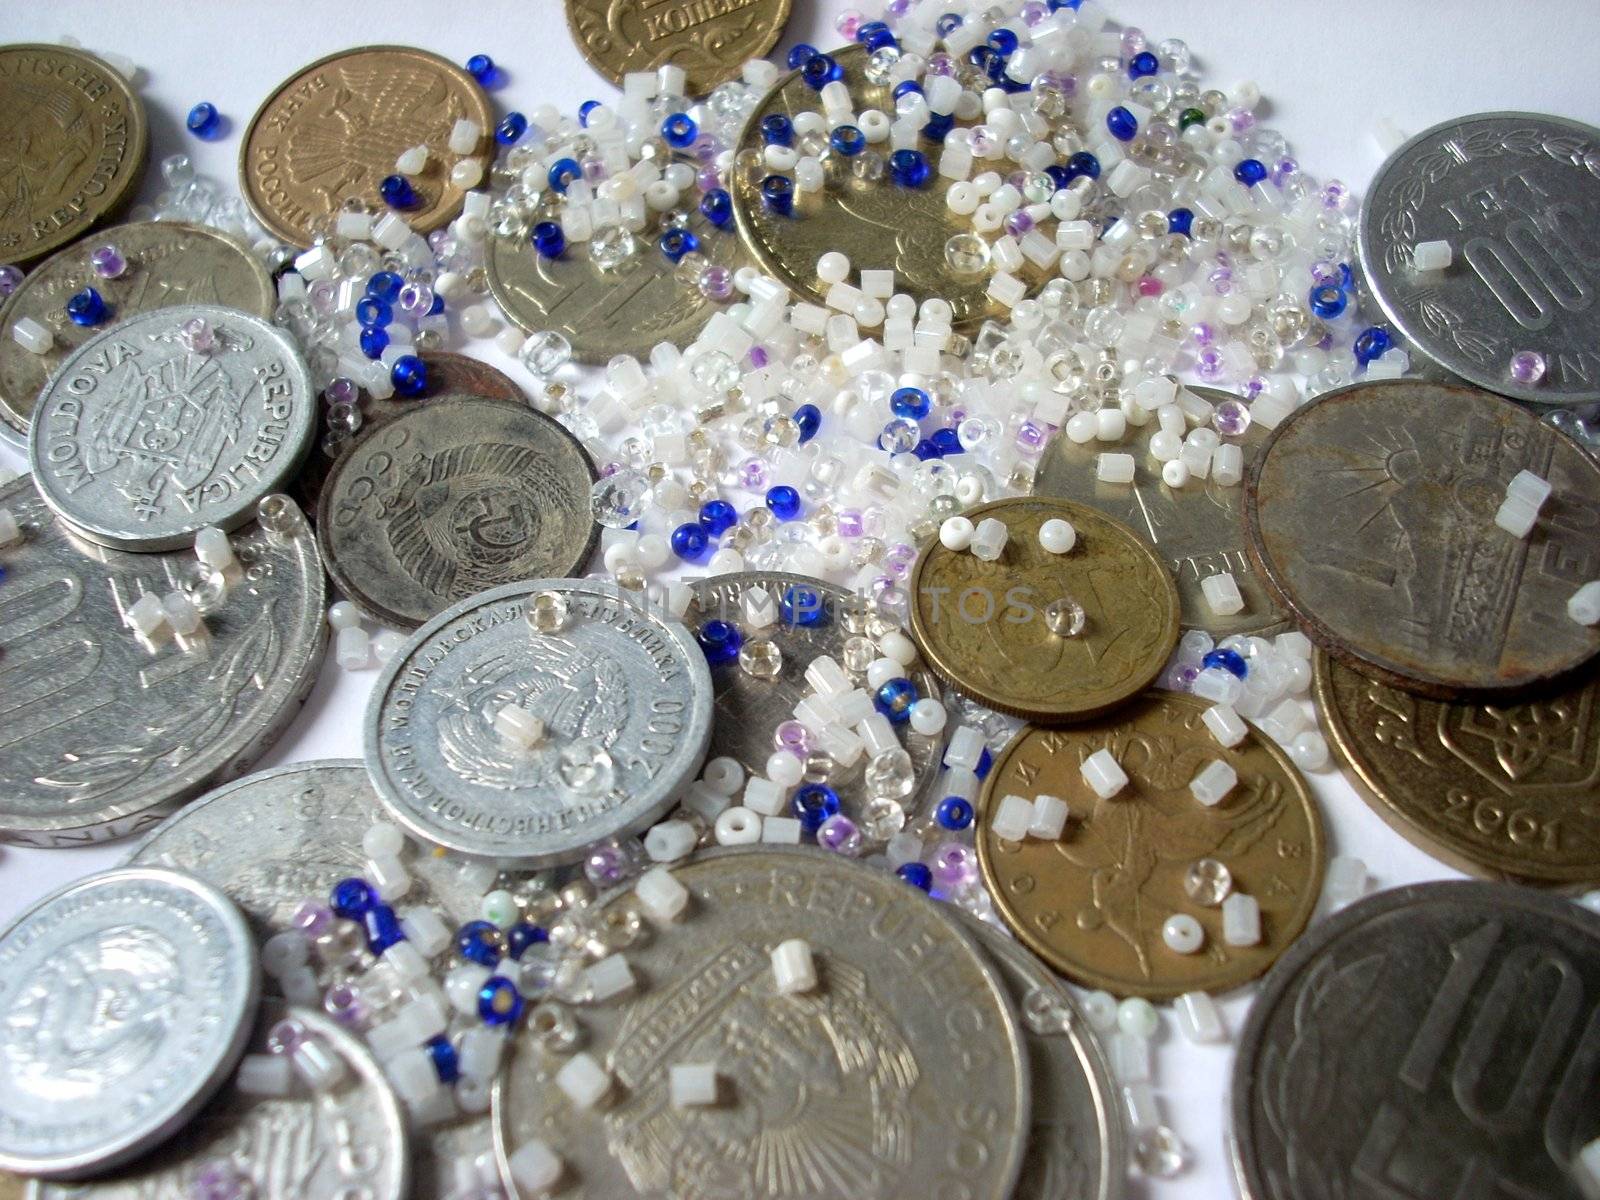 Money: some coins and glass beads